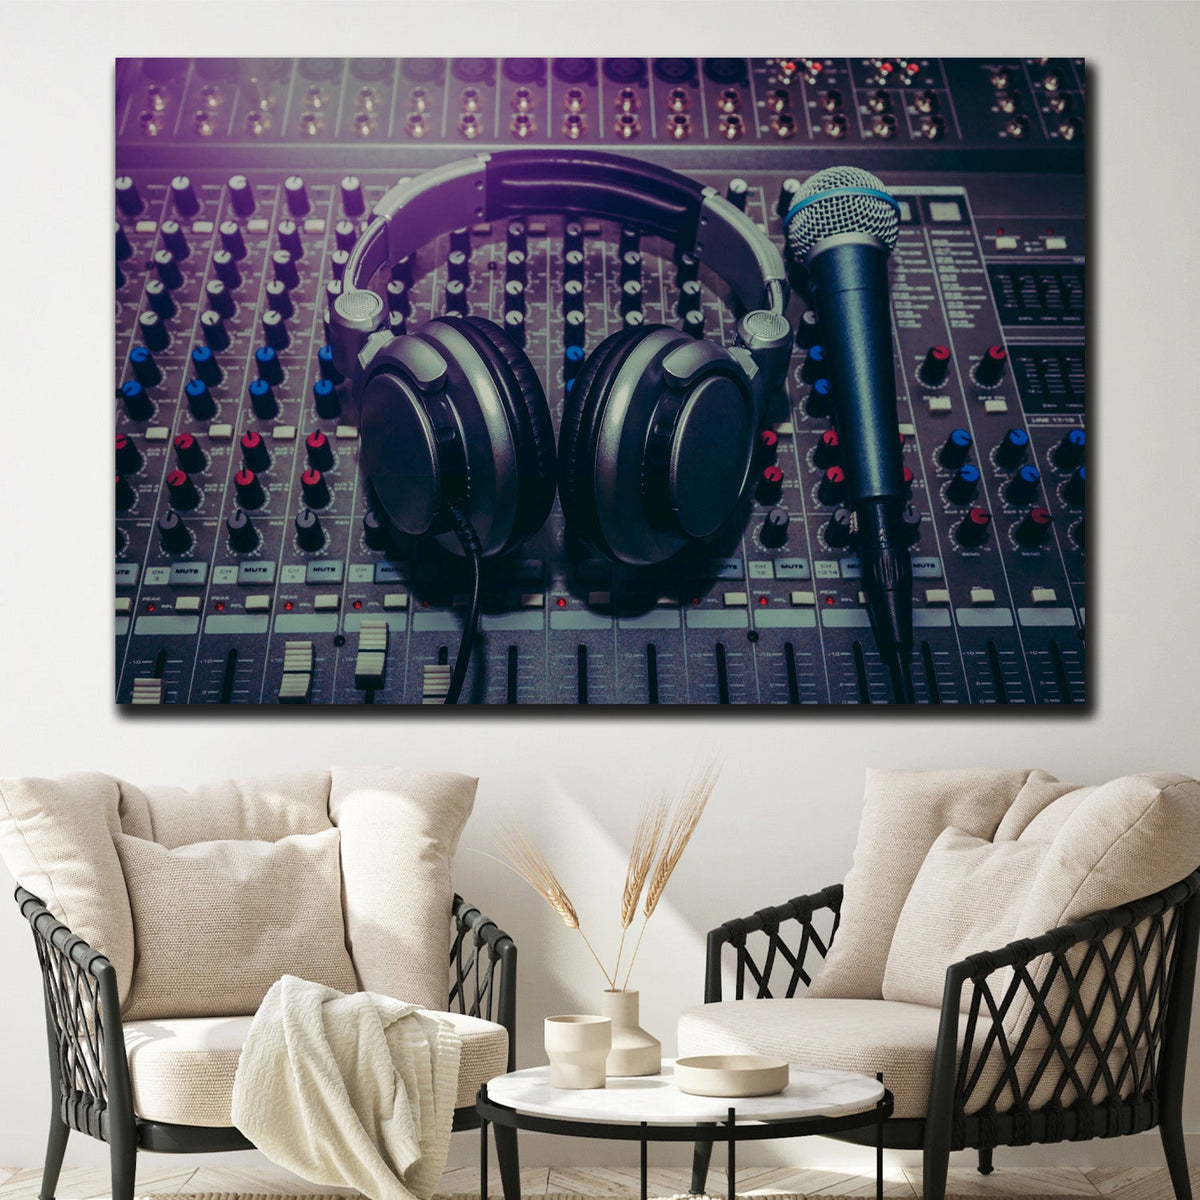 https://cdn.shopify.com/s/files/1/0387/9986/8044/products/FeeltheMusicCanvasArtprintStretched-2.jpg